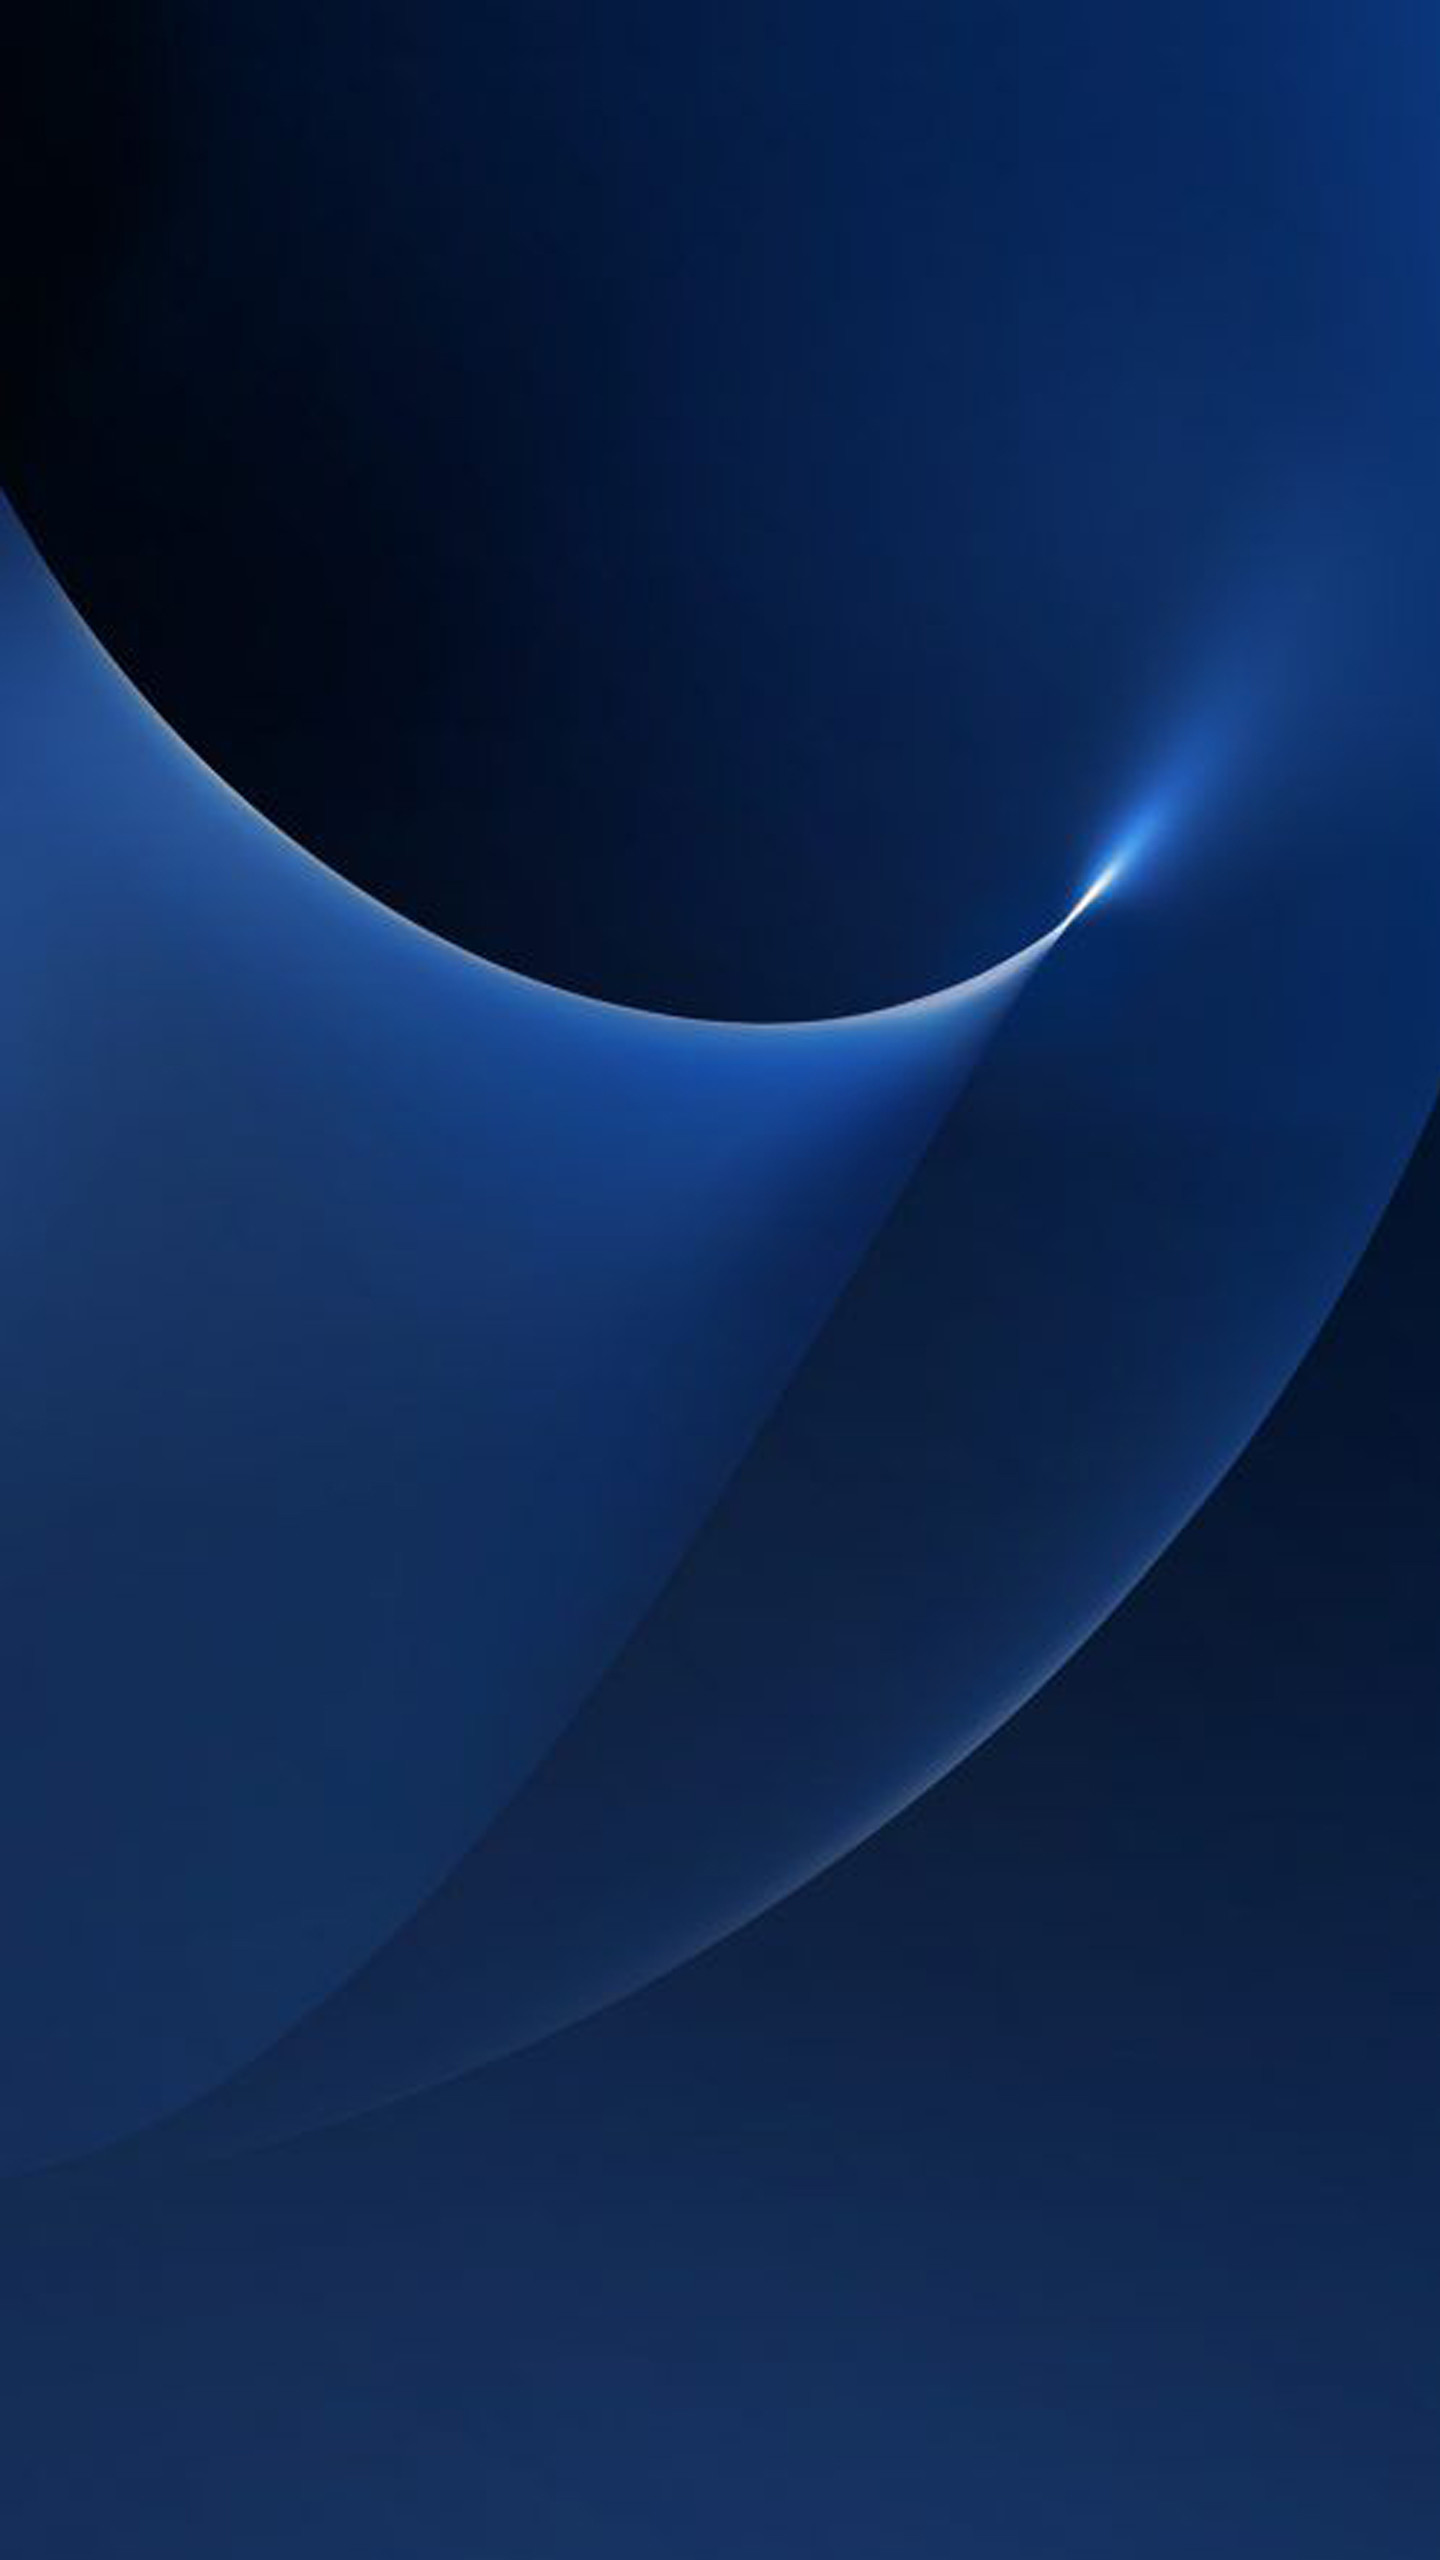 1440x2560 ... Curve Lights 06 for Samsung Galaxy S7 and Edge Wallpaper